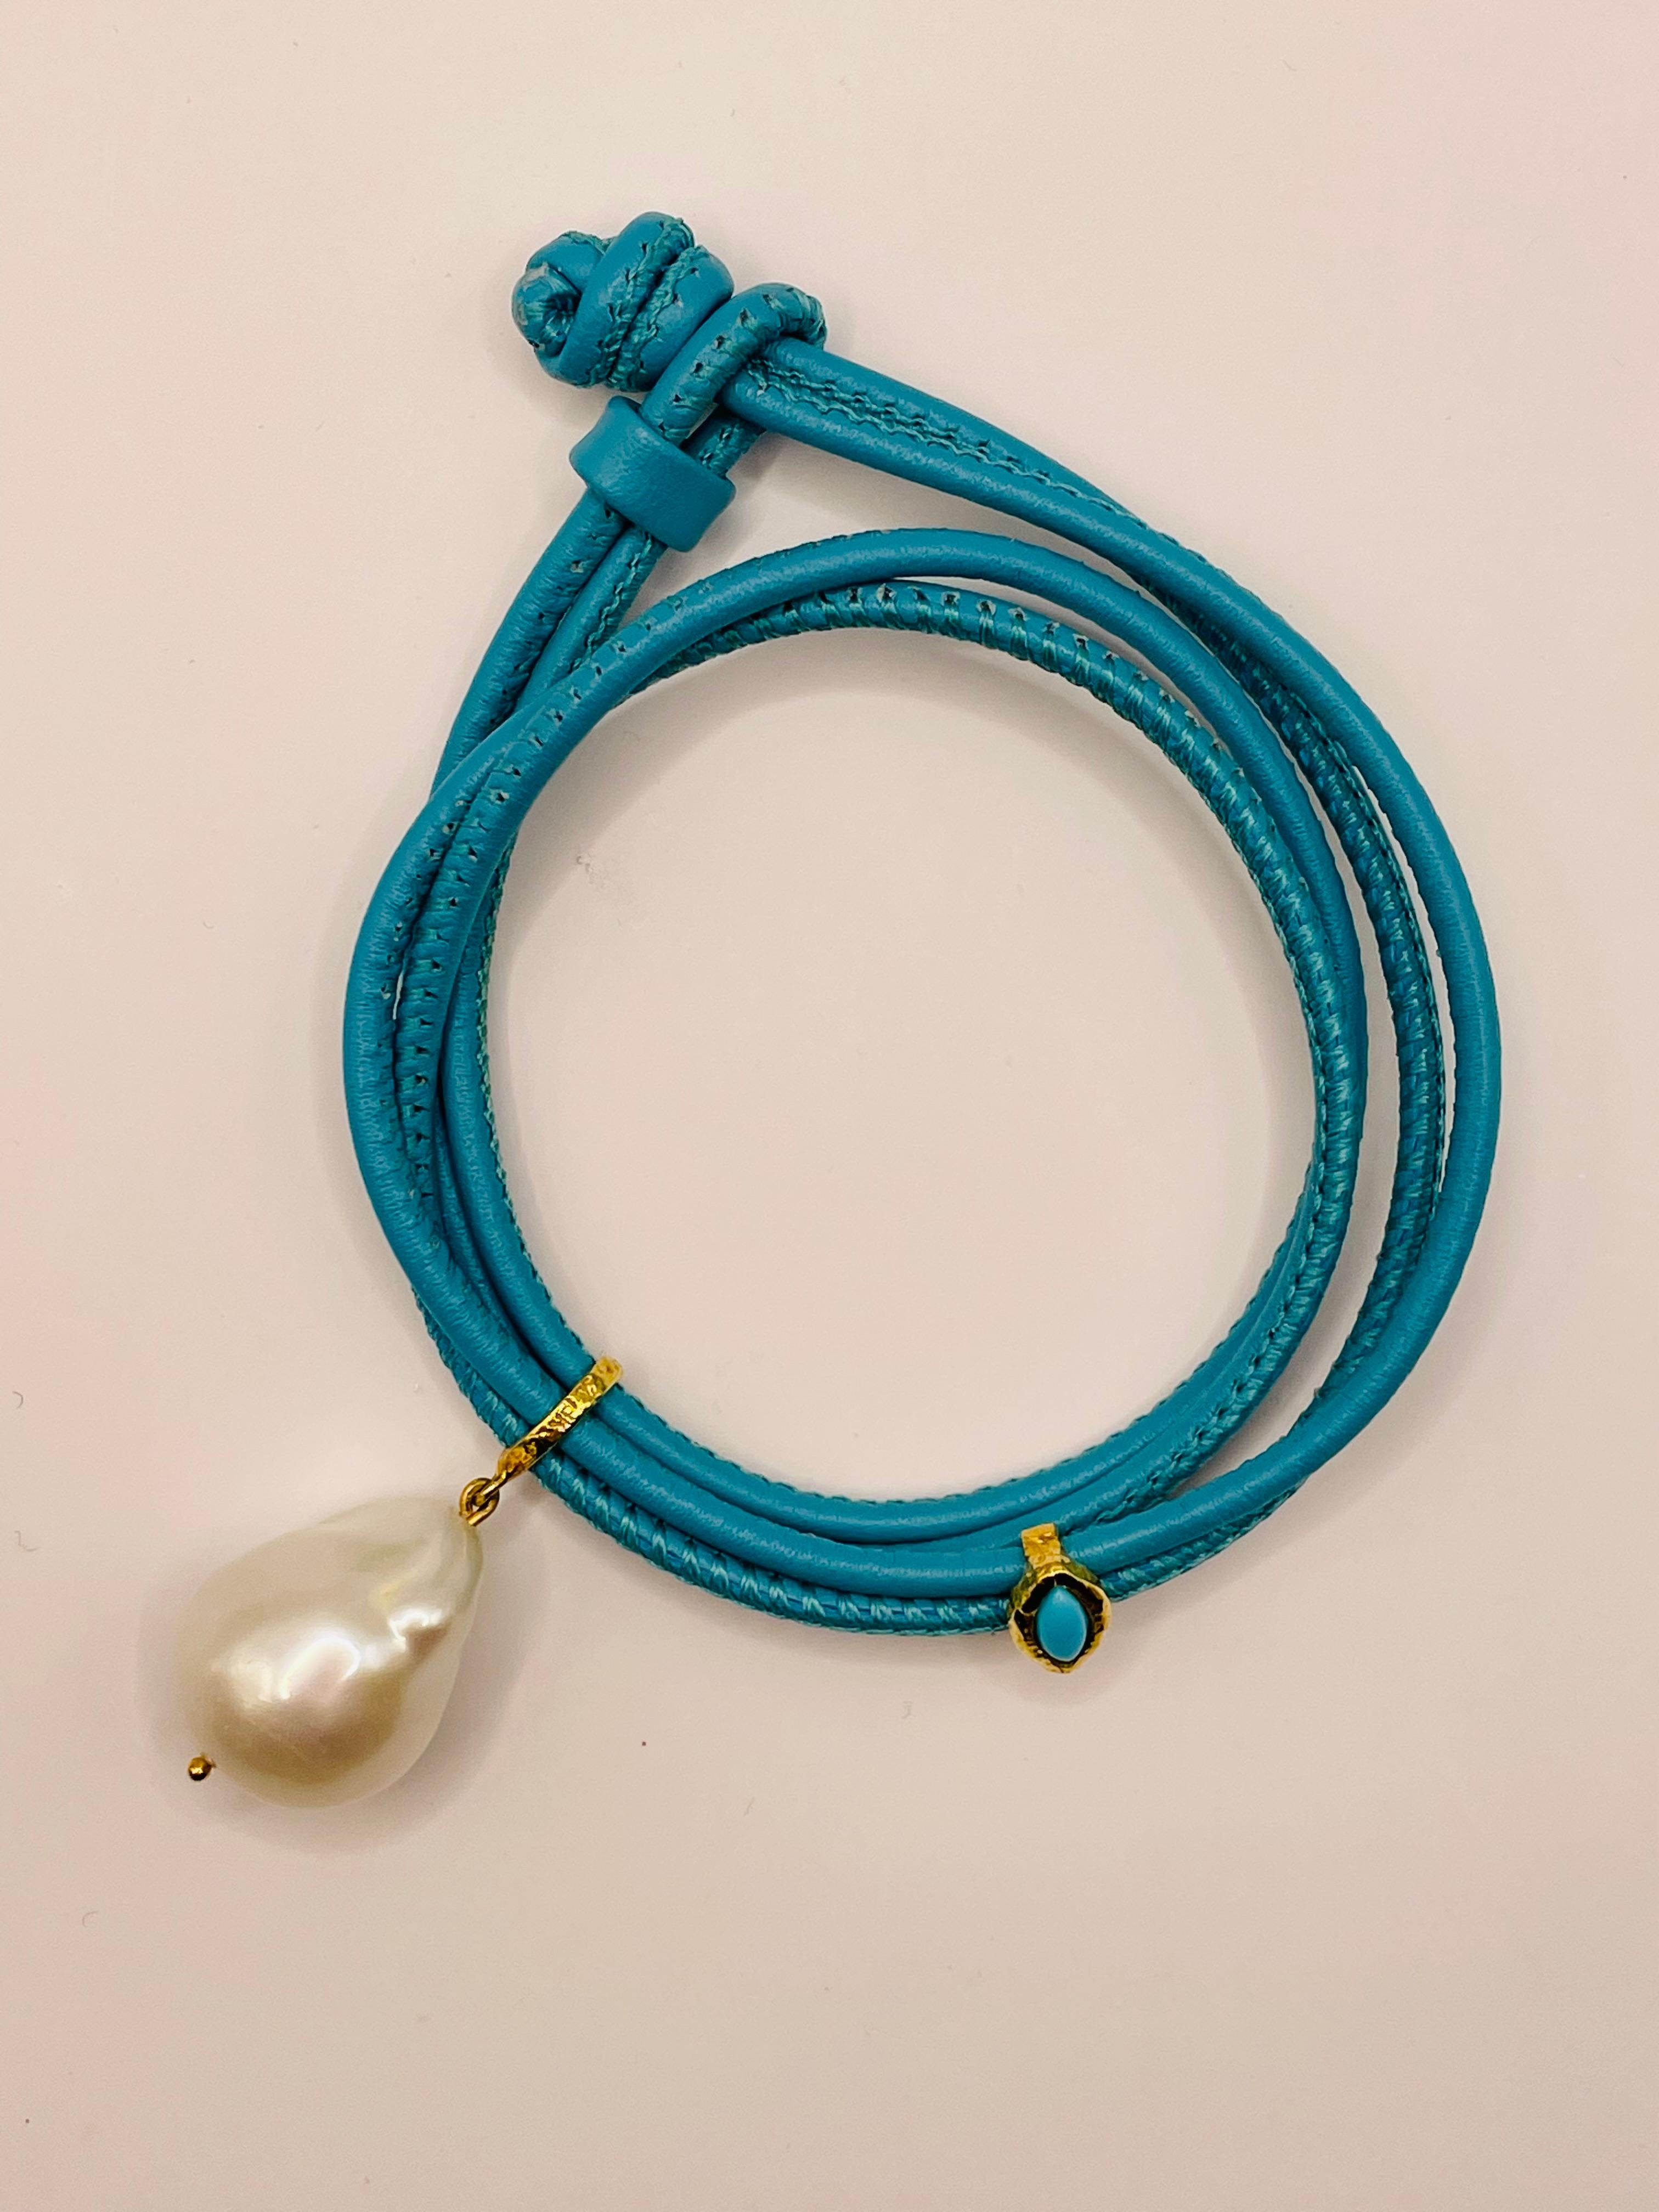 White fresh water baroque  pearl ,turquoise evil eye bracelet .18k gold and Italian turquoise color leather .14 in long ,doubles twice around the wrist  .A bracelet that sets you a part!